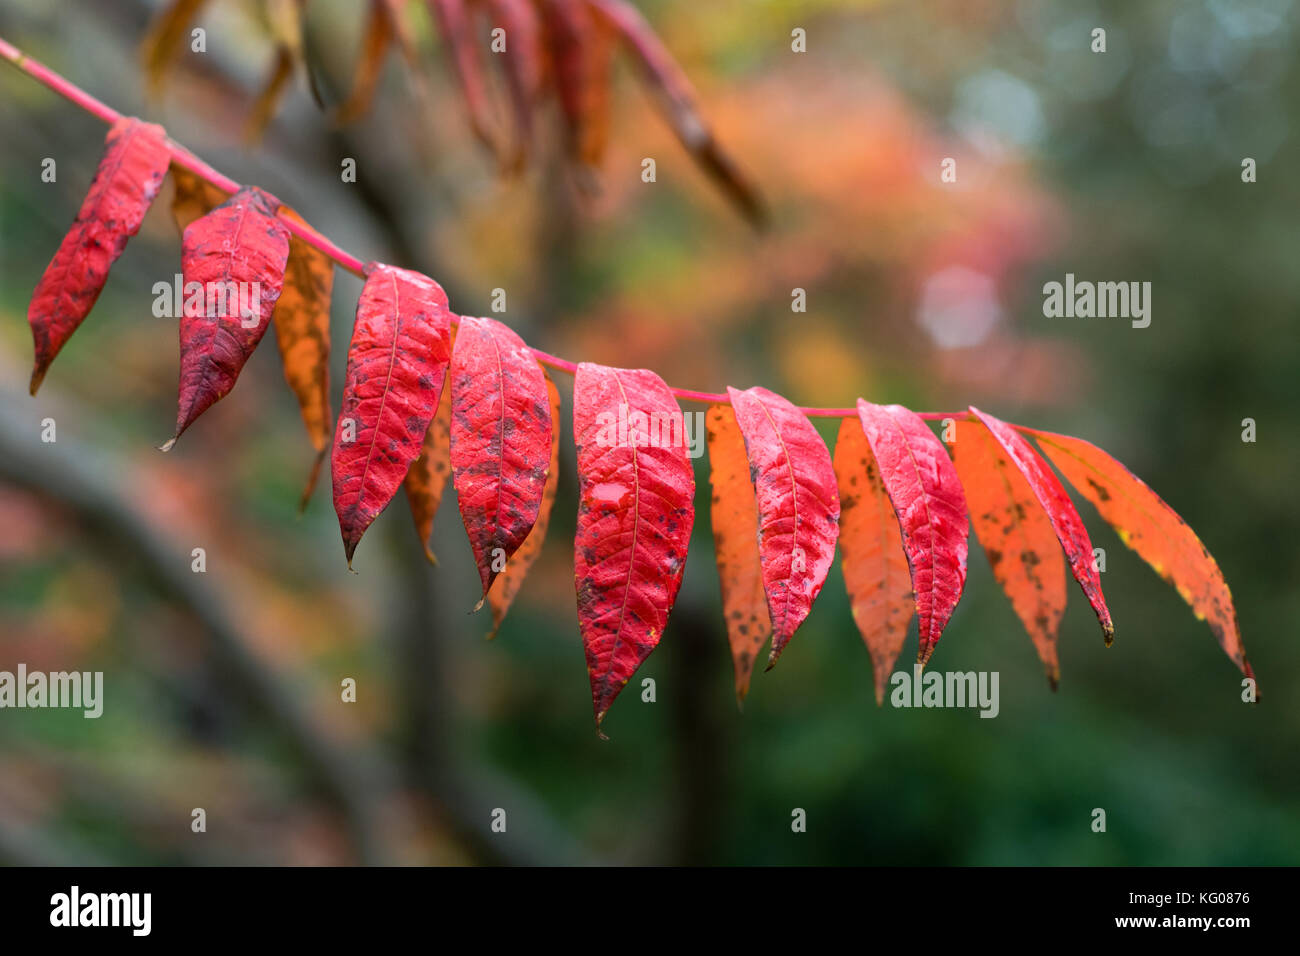 Autumn leaves of Rhus Glabra 'Smooth Sumach'. Sumac in the family Anacardiaceae showing autumnal red colour, as October advances in England Stock Photo